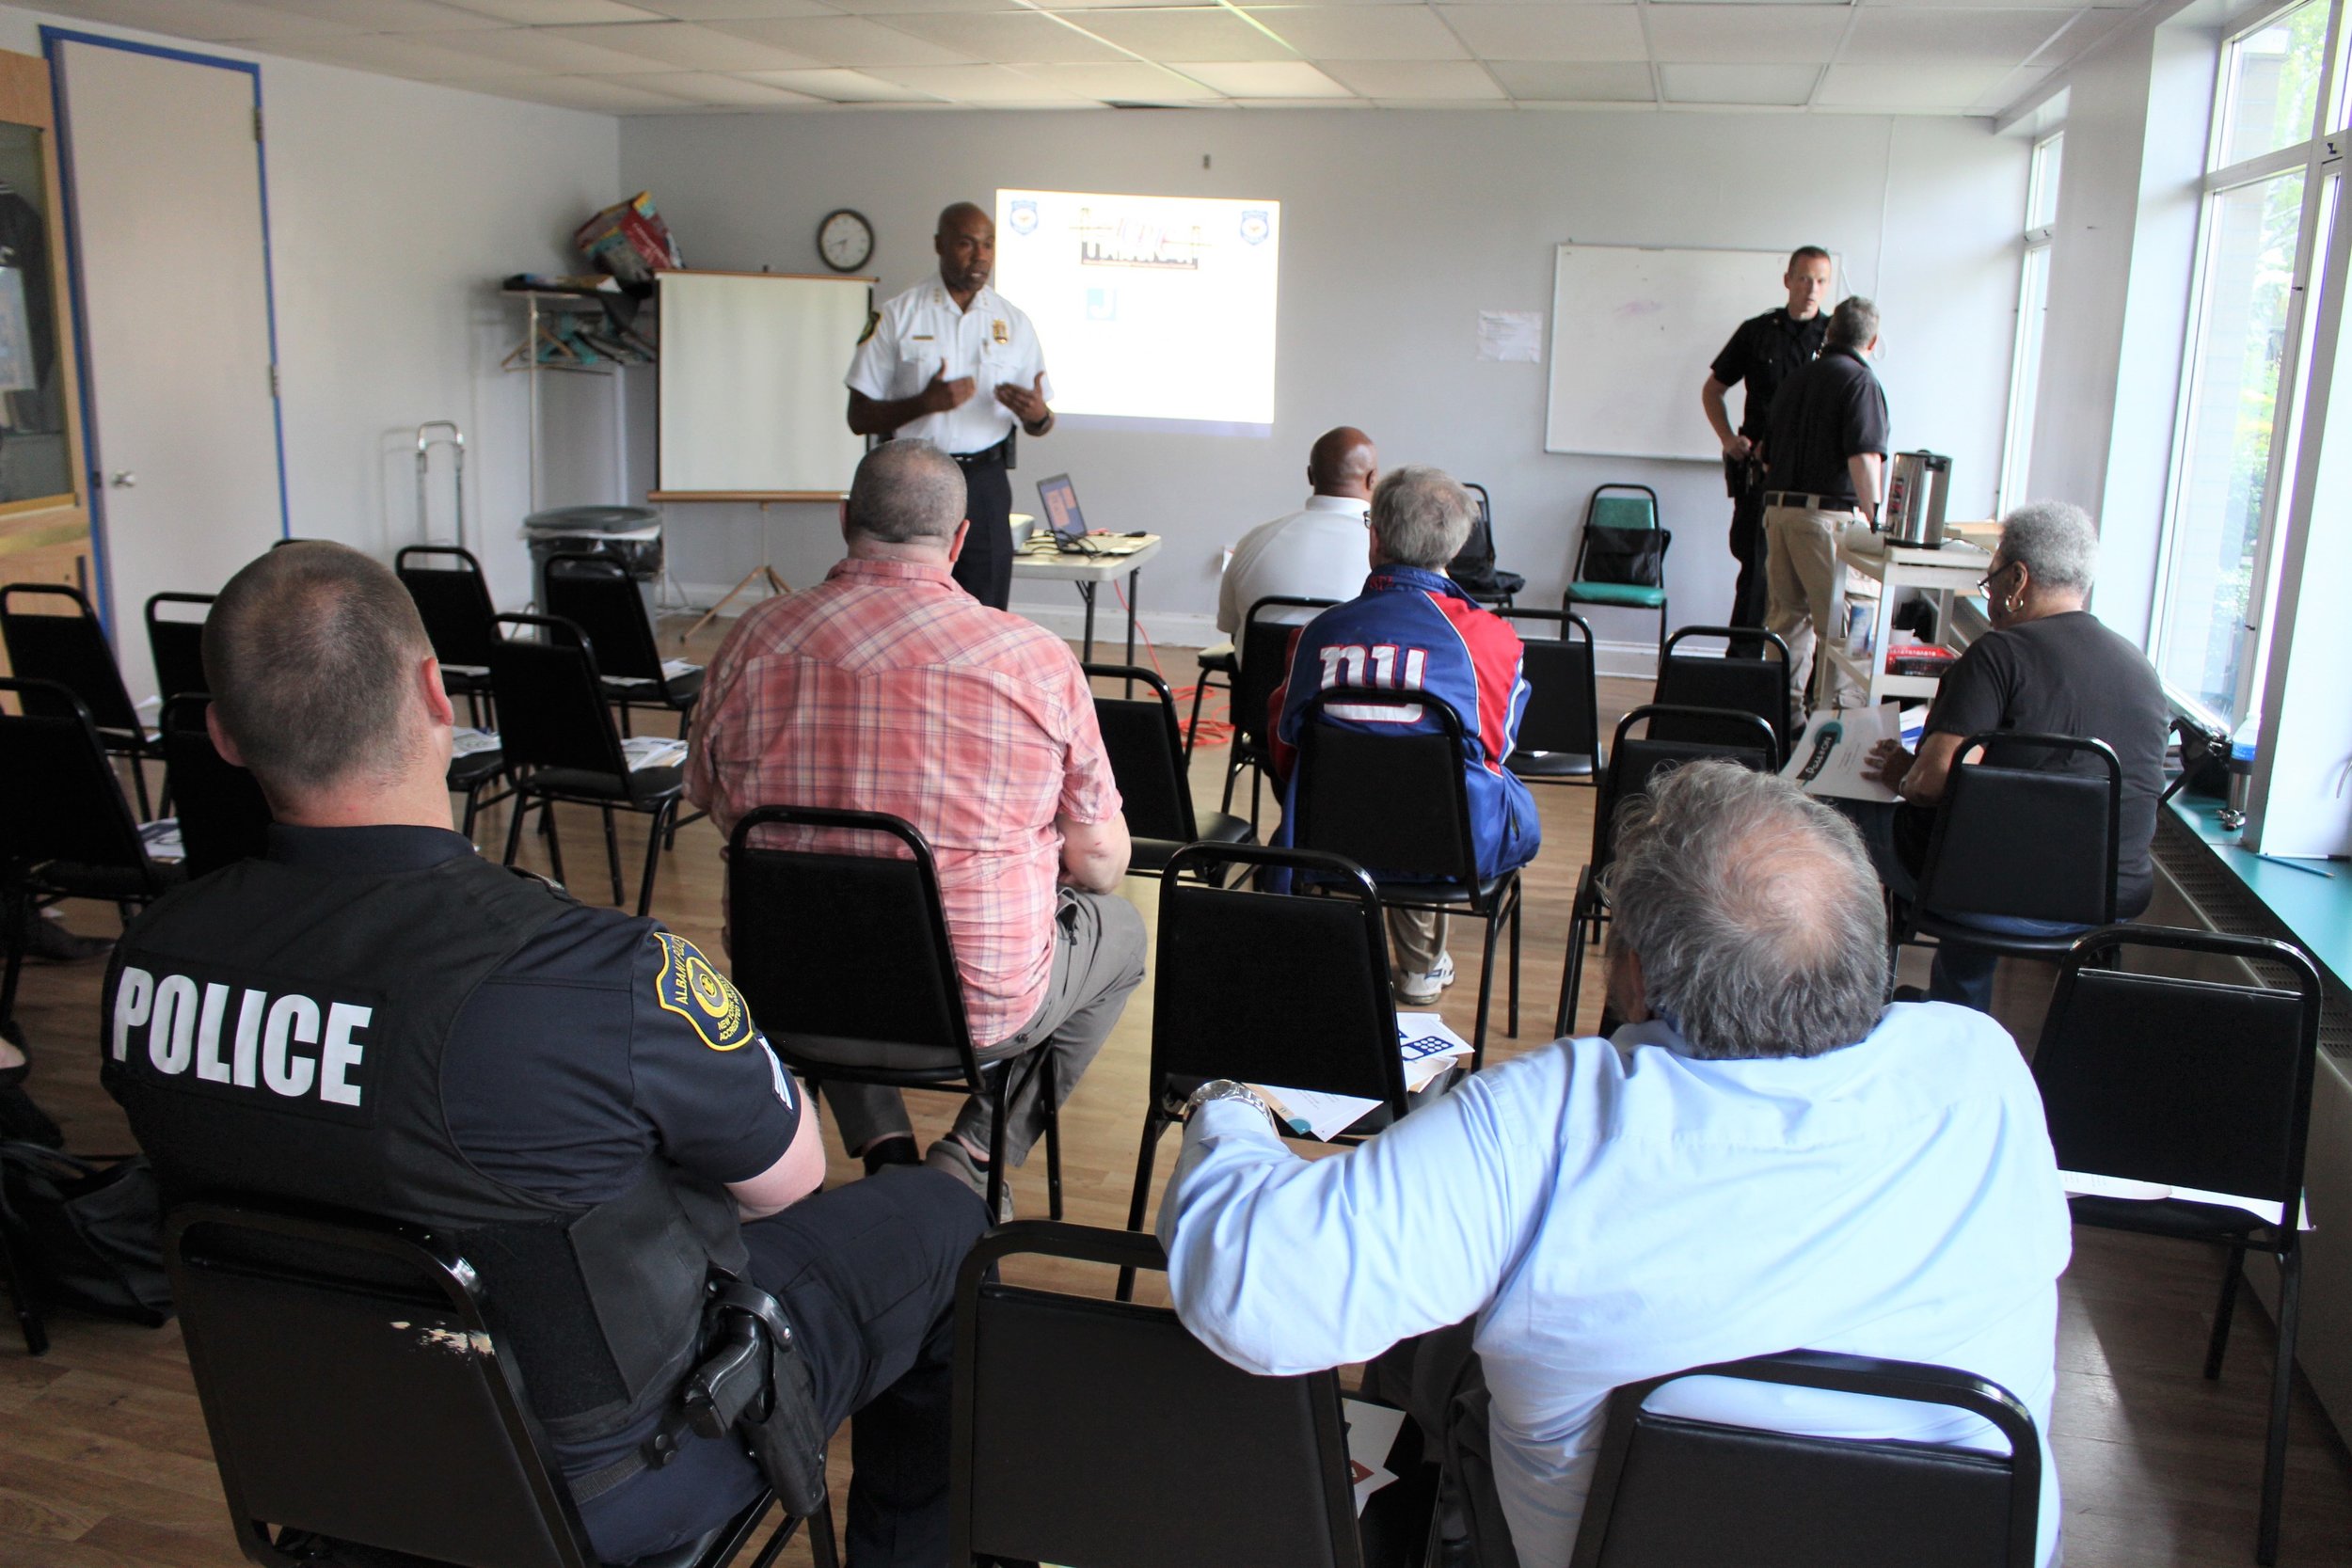  A meeting of the ACPAC with Chief Hawkins and police staff.  